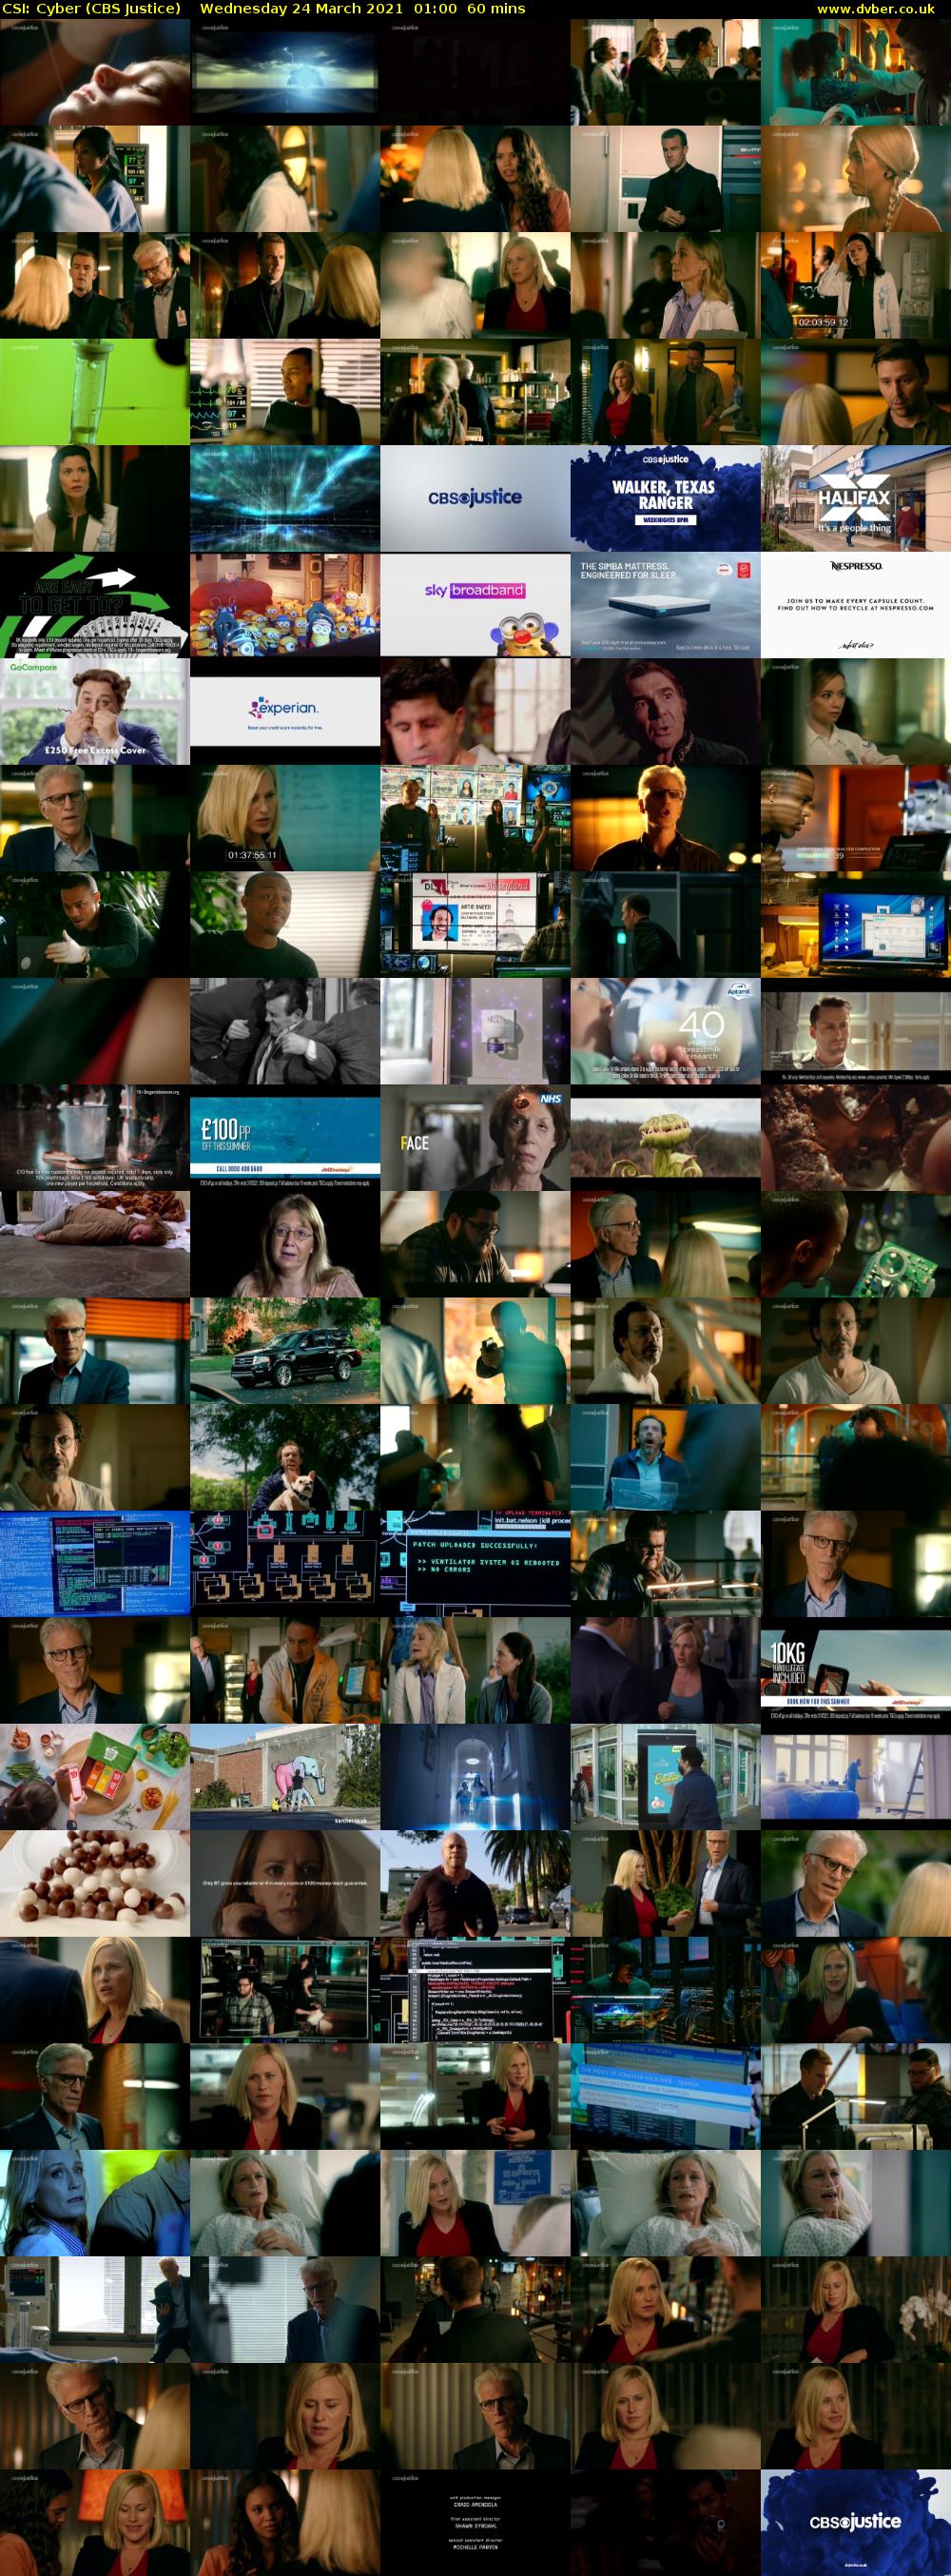 CSI: Cyber (CBS Justice) Wednesday 24 March 2021 01:00 - 02:00